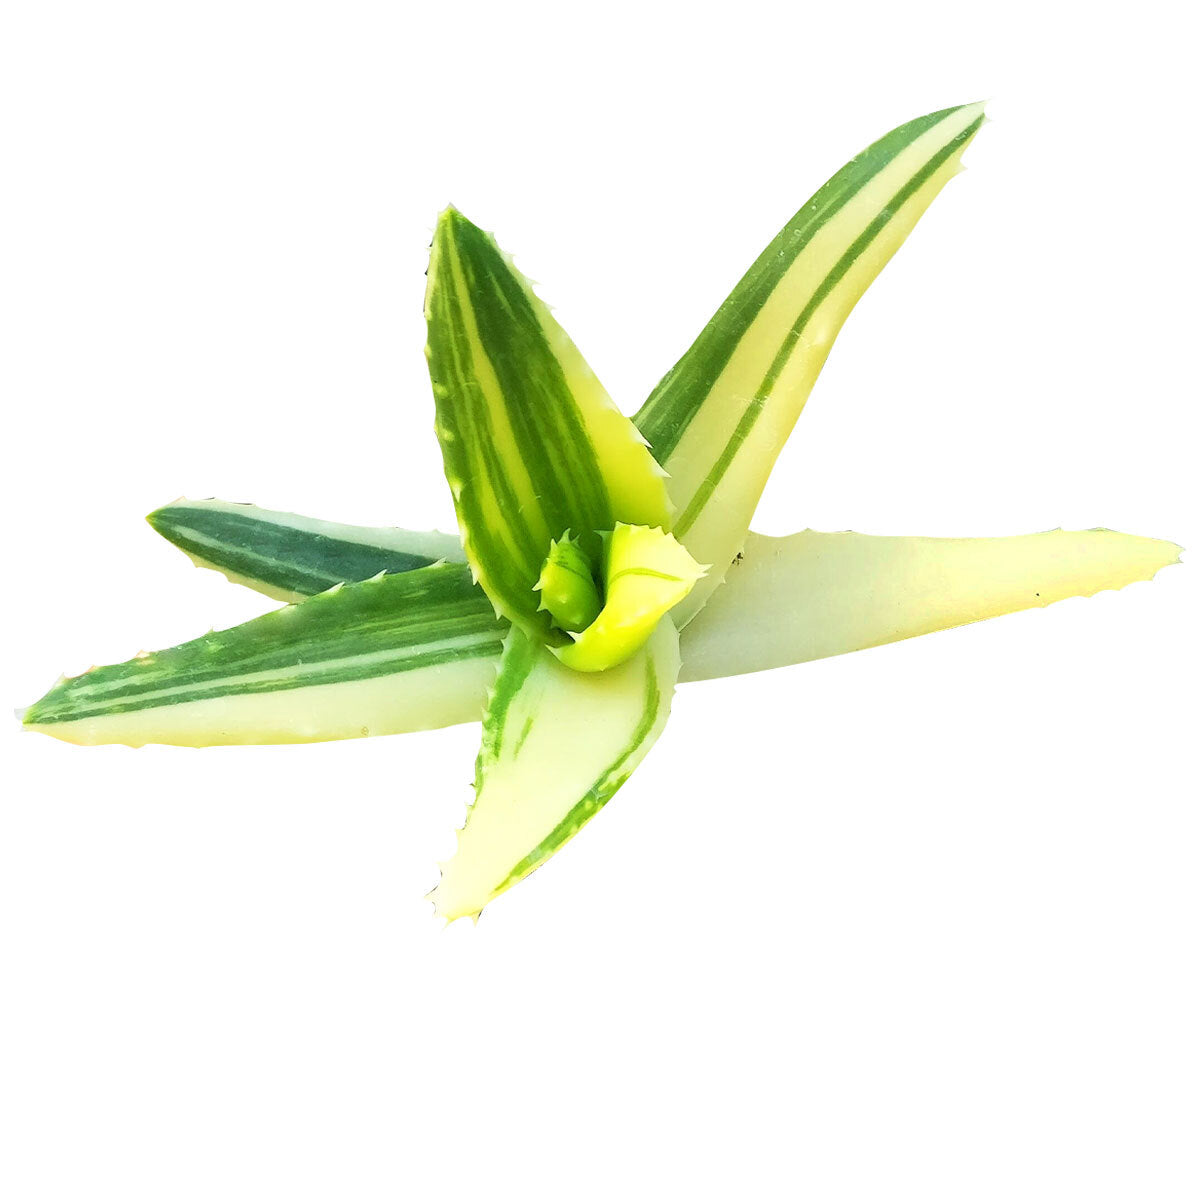 Variegated aloe for sale, succulents shop in California, succulent care, how to grow succulents, succulents garden, Succulents shop near me, Rare succulents, cactus, succulent care tips, Variegated aloe in California, How to grow Variegated aloe